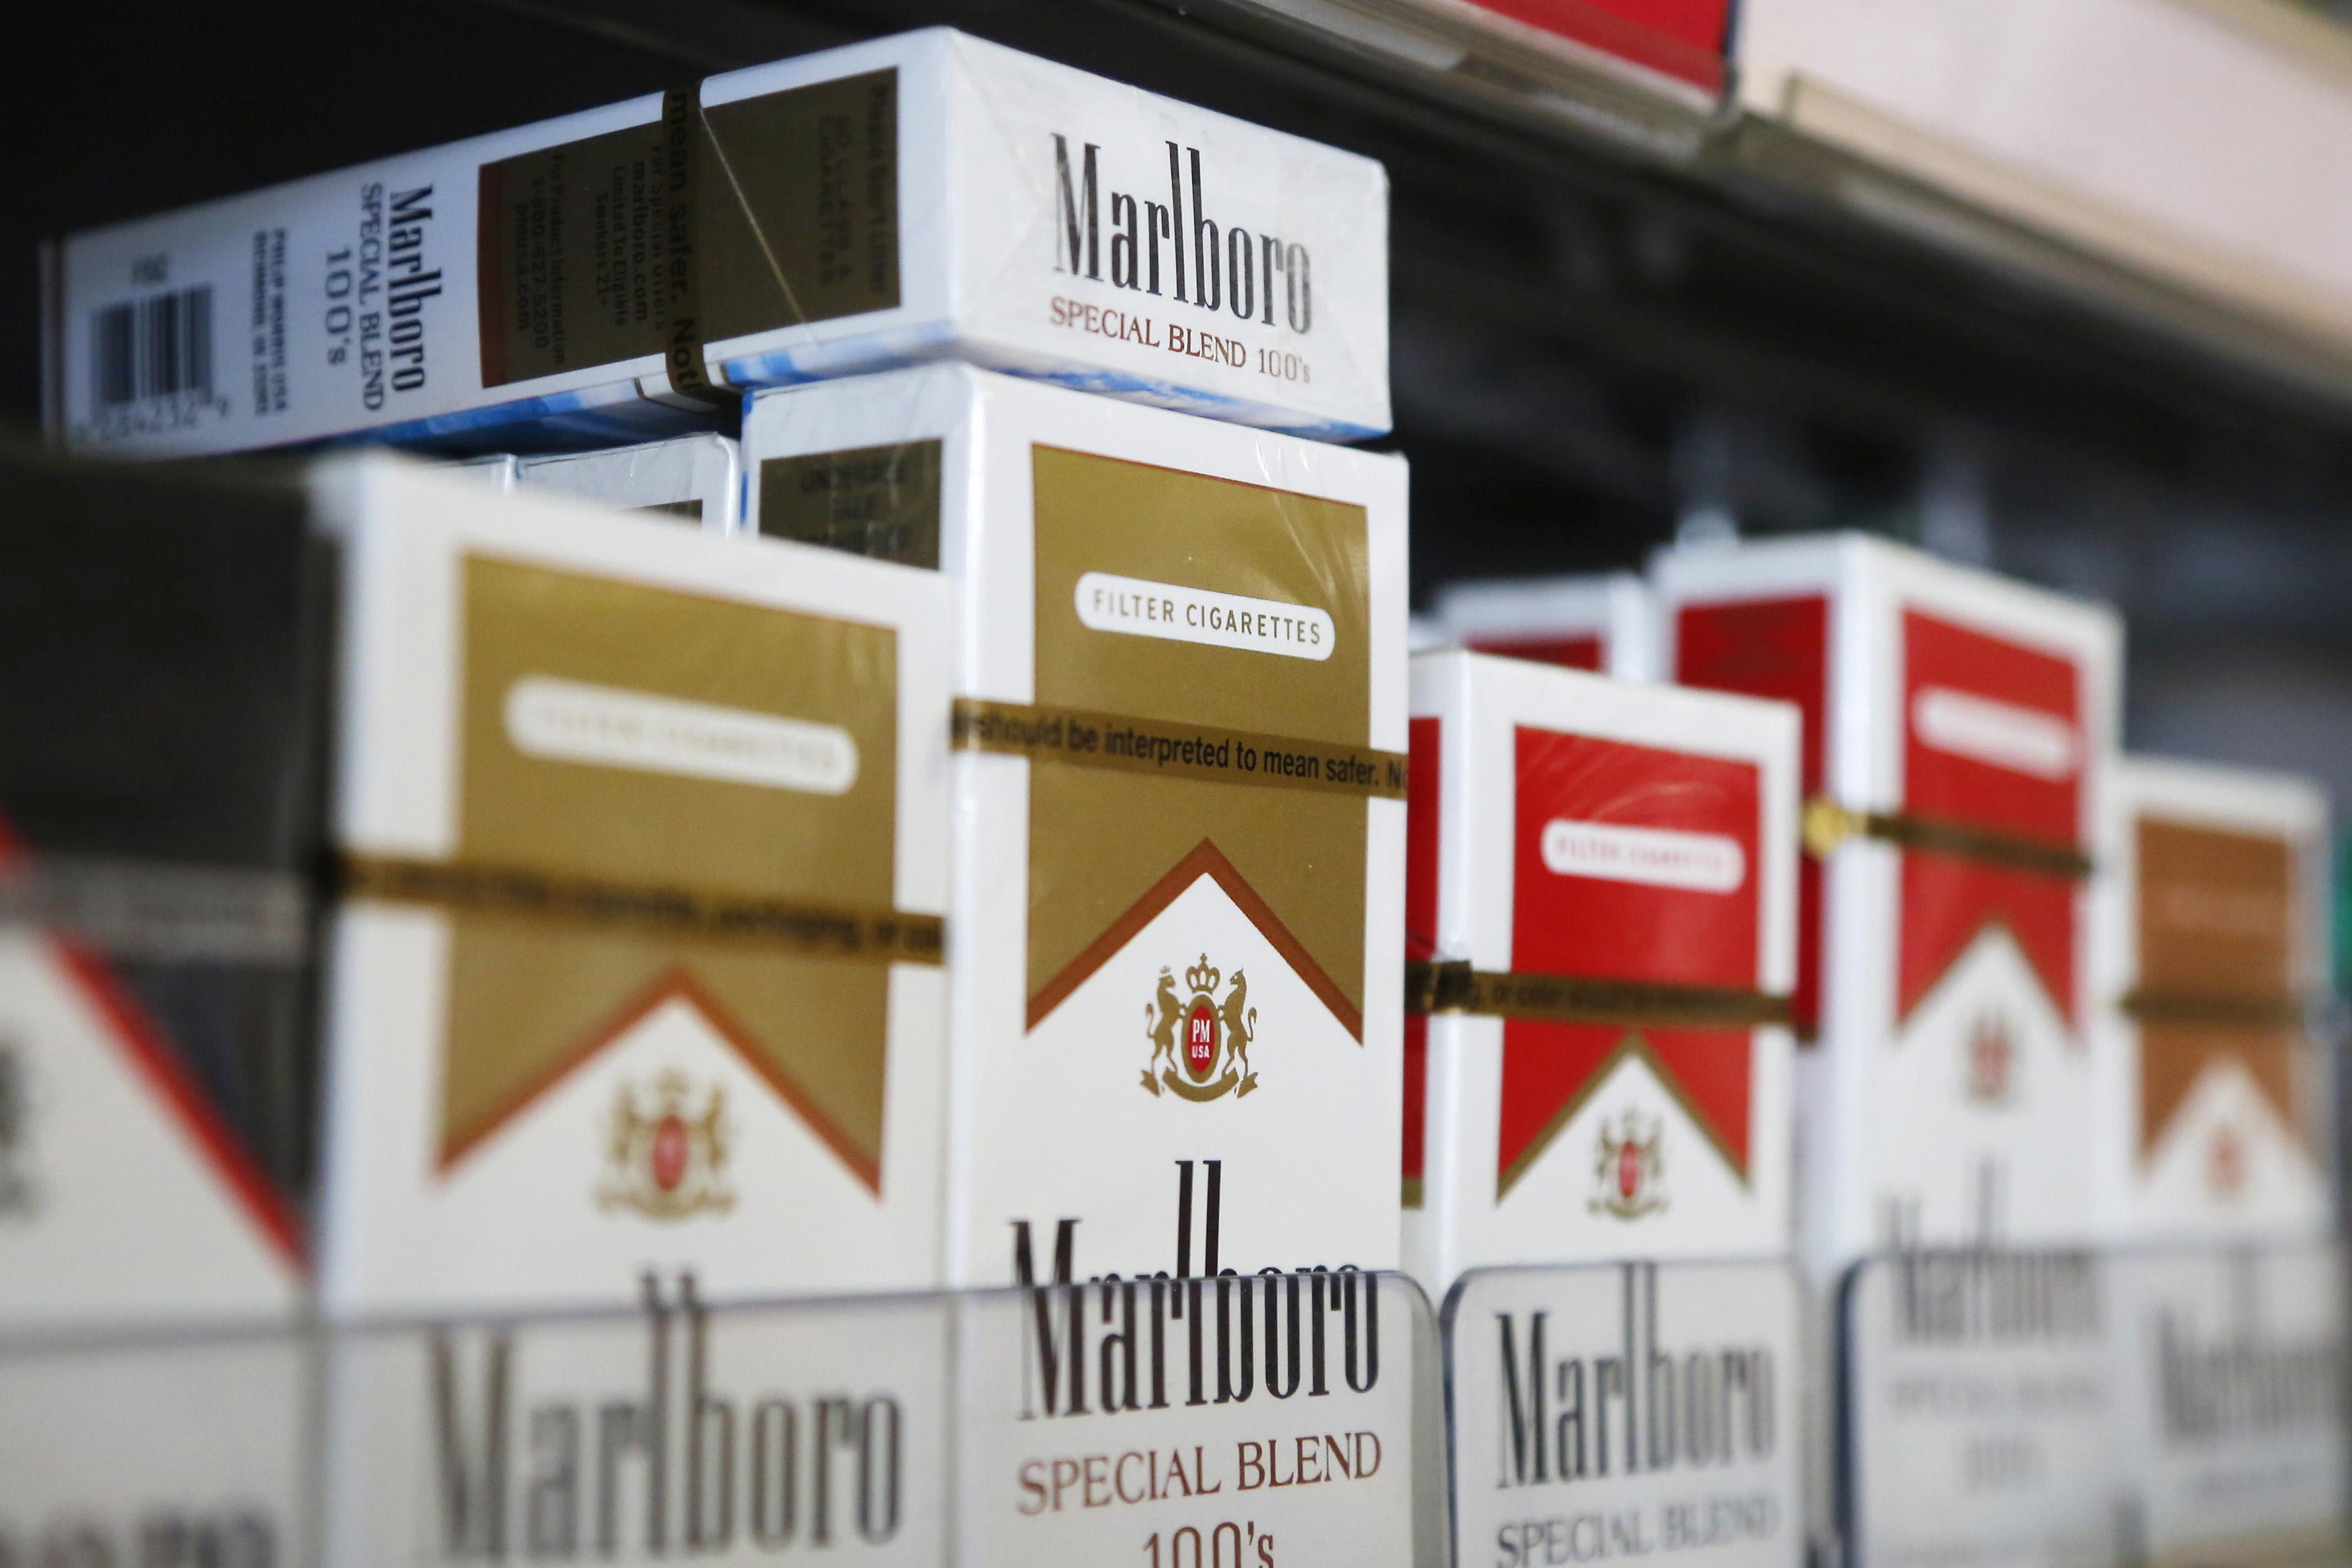 Packs of Marlboro cigarettes are displayed for sale at a convenience store in Somerville, Massachusetts July 17, 2014.